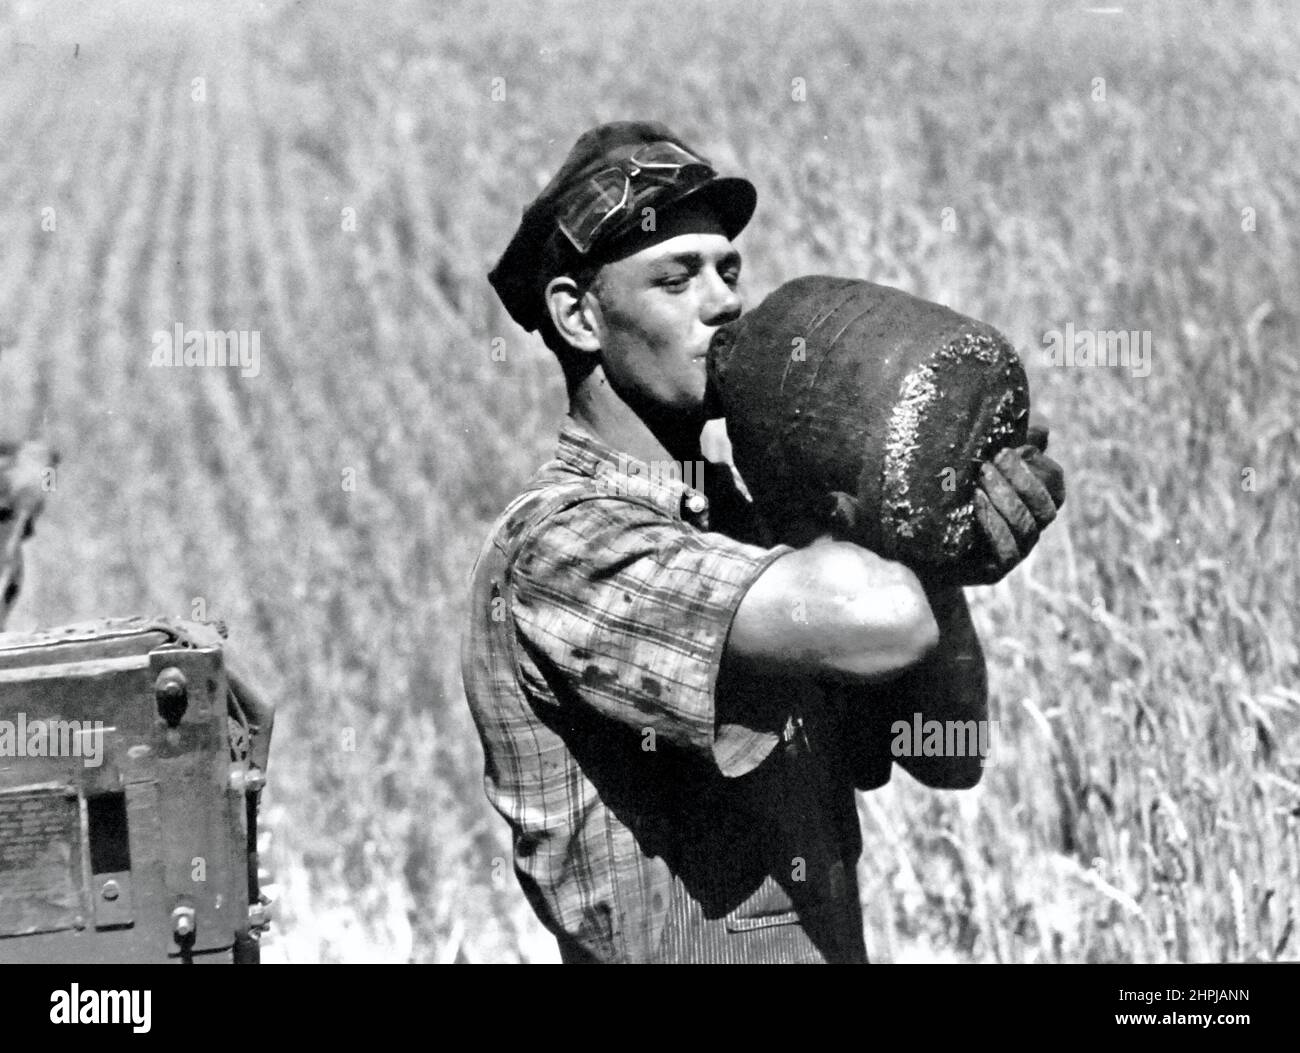 Marion Post Wolcott - Tractor driver quenching his thirst - 1941 Stock Photo